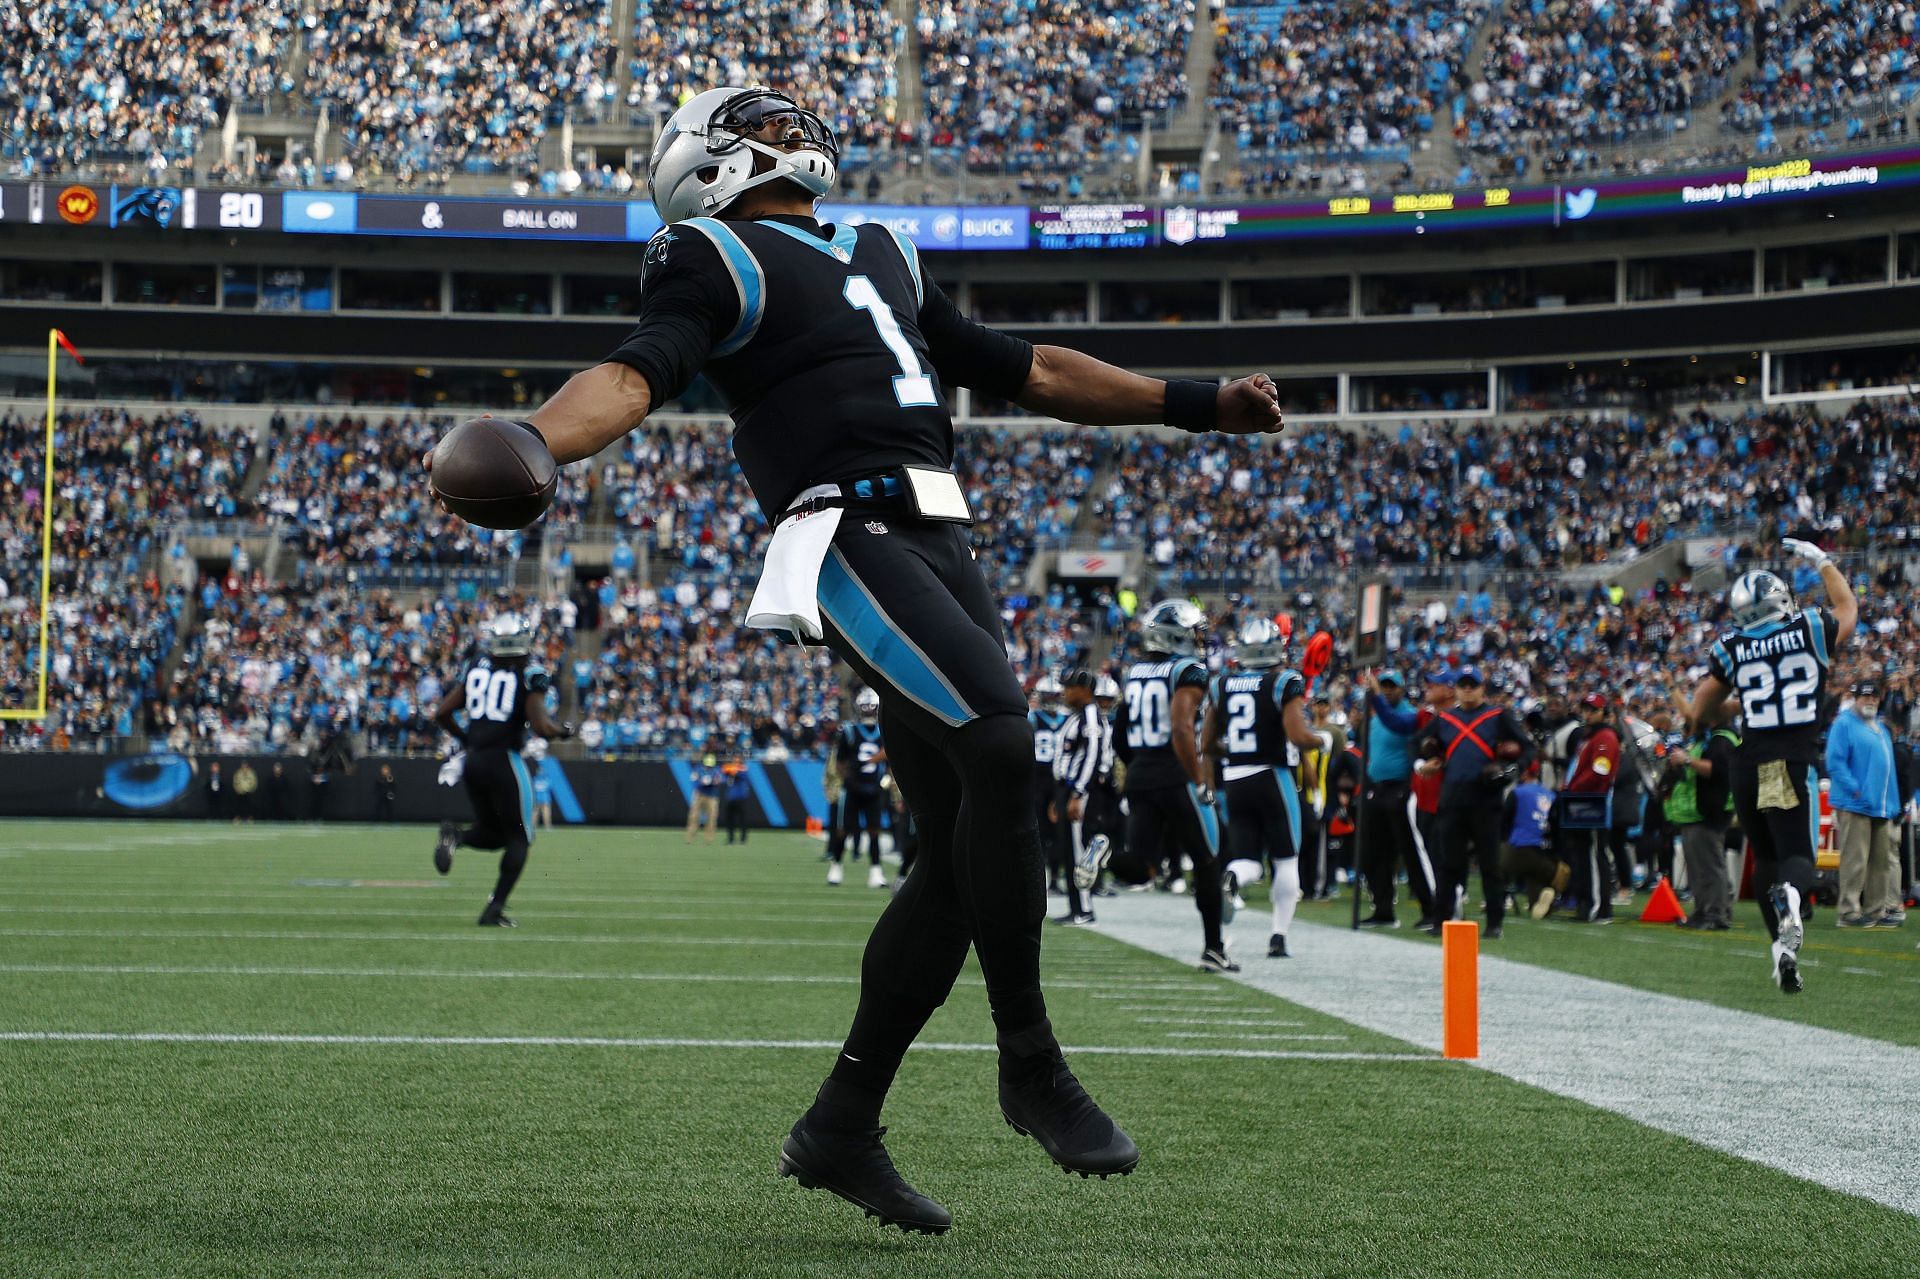 Carolina Panthers QB Cam Newton in the end zone